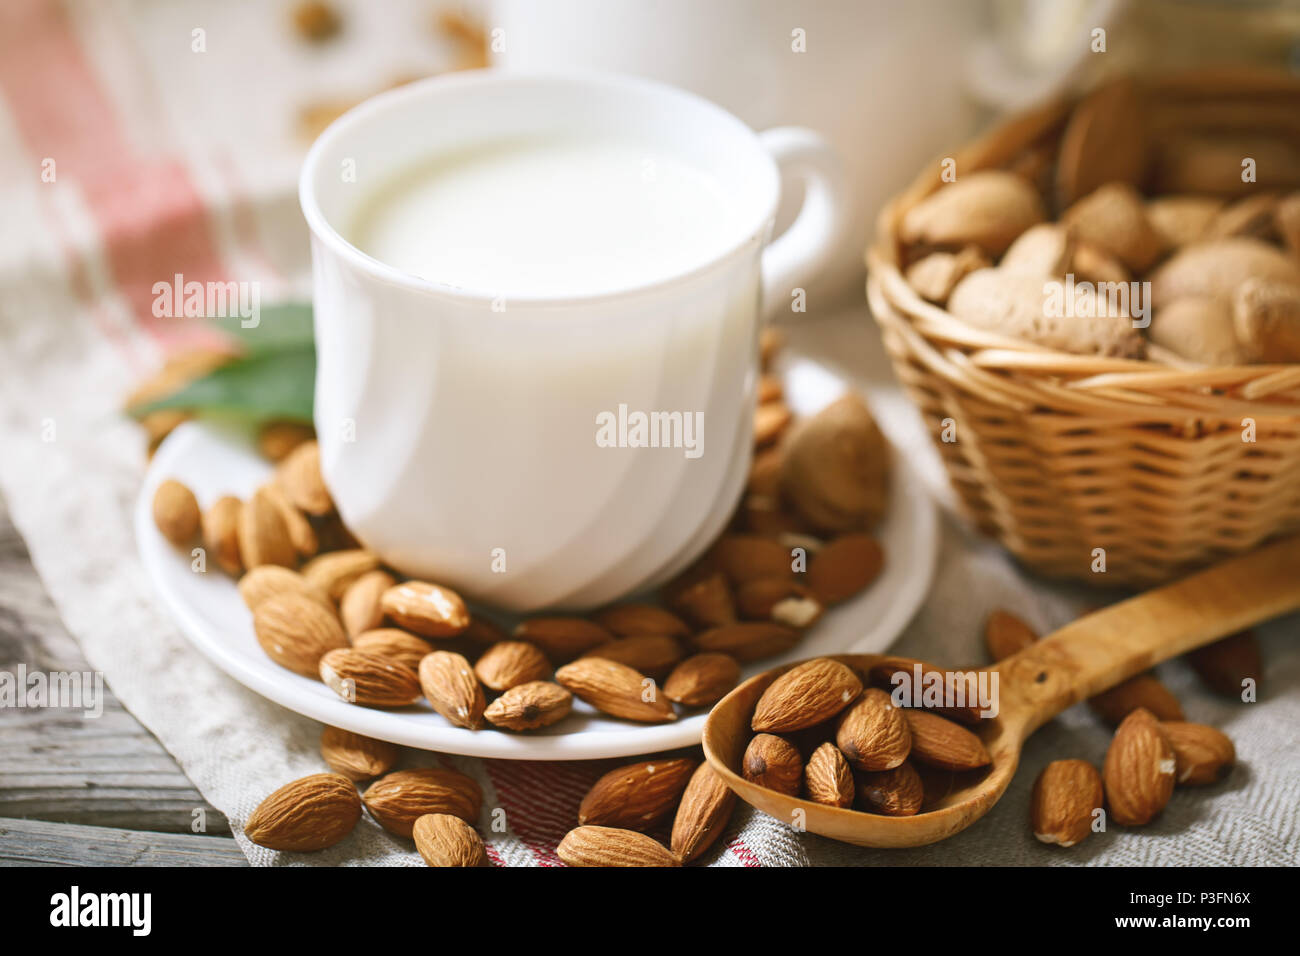 Almond and almond milk on a wooden table in the summer garden. Useful food. Stock Photo